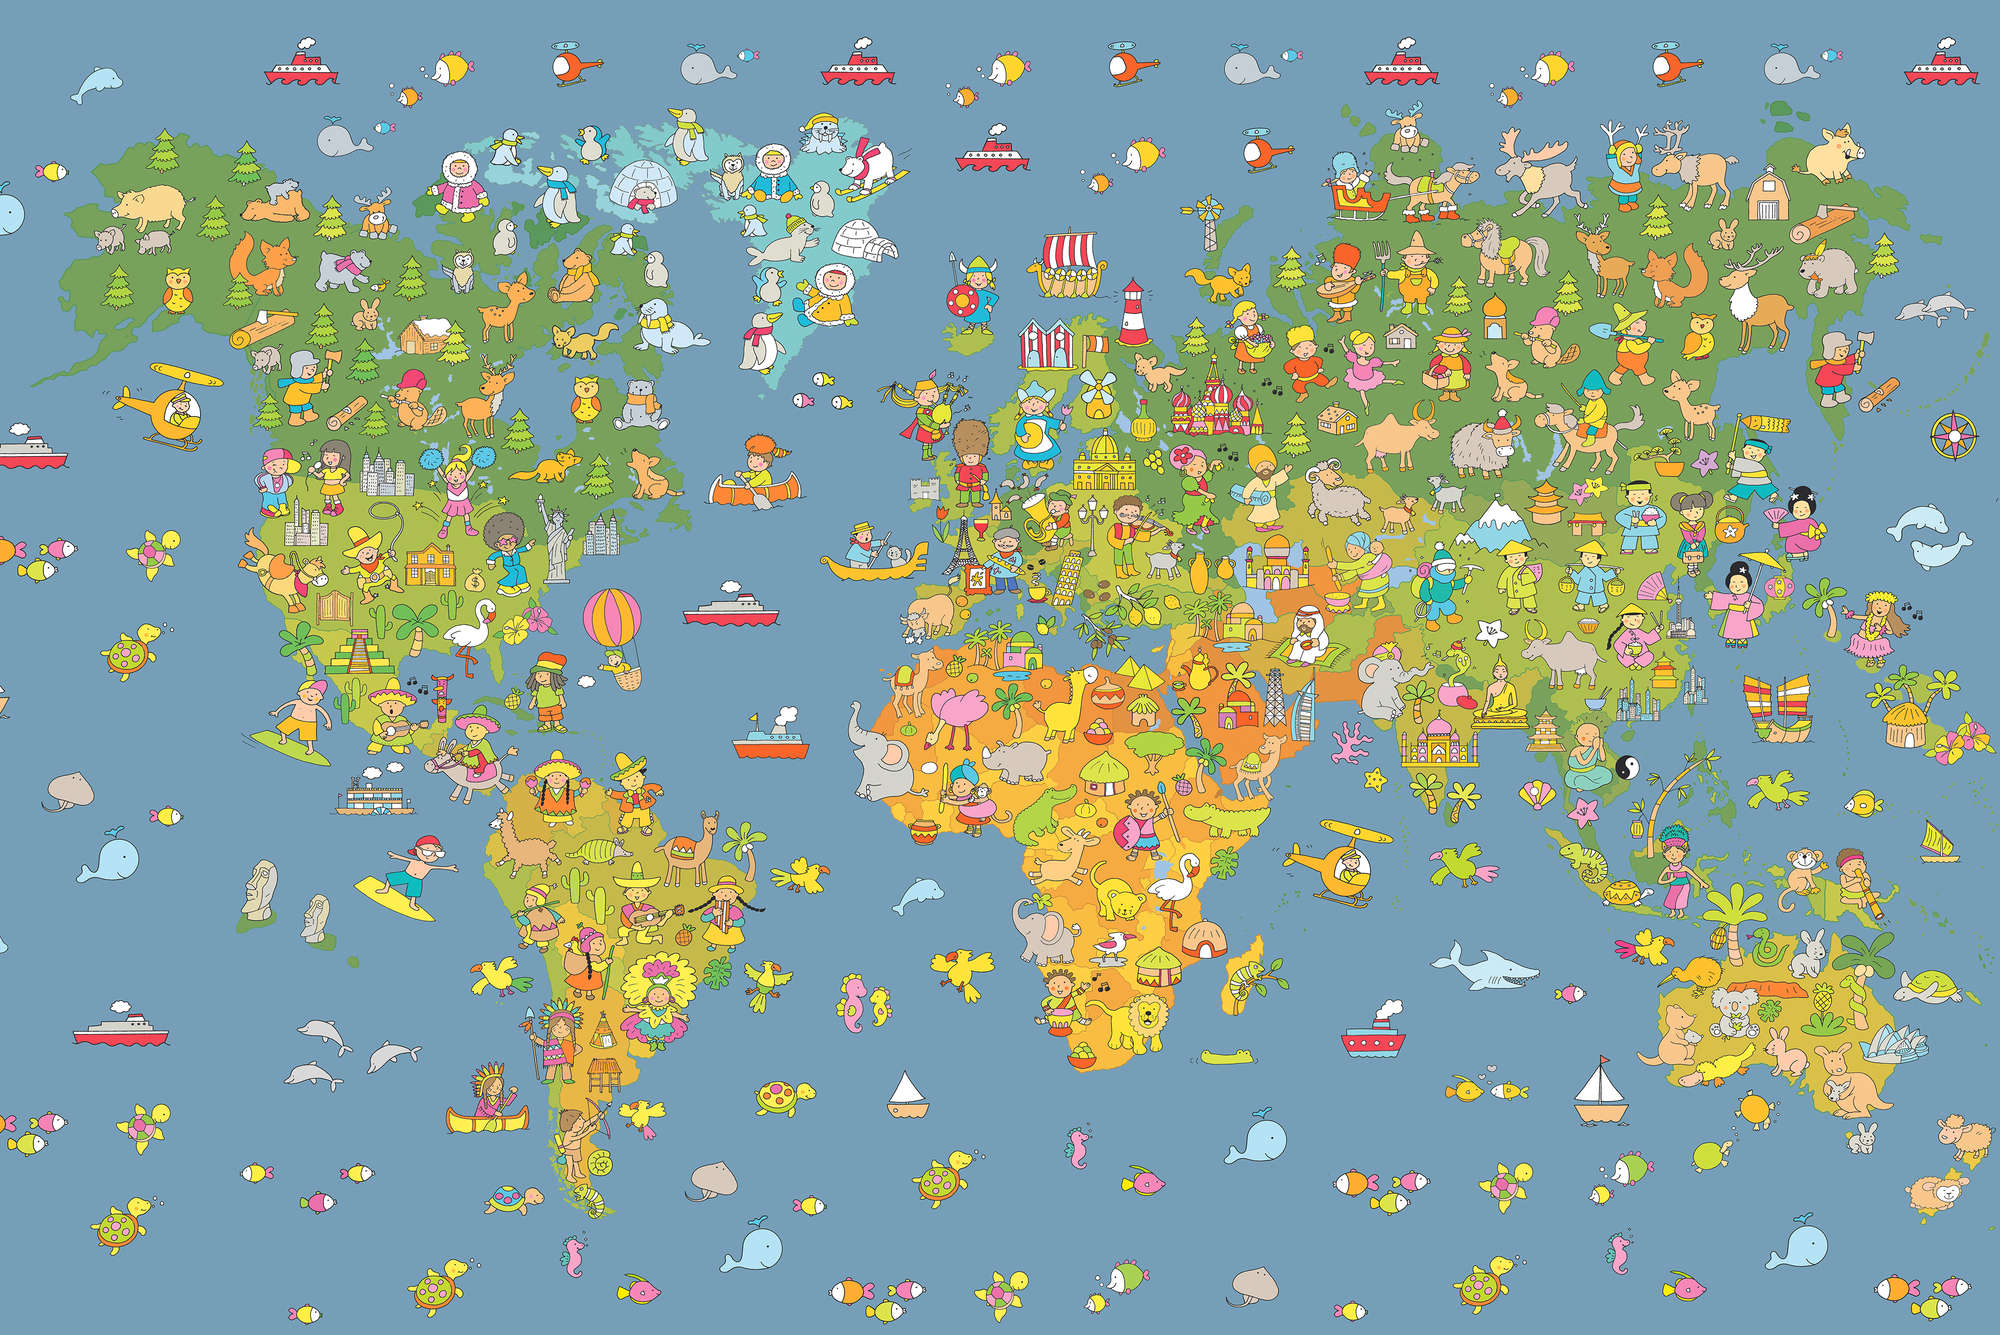             Kids mural world map with country symbols on premium smooth fleece
        